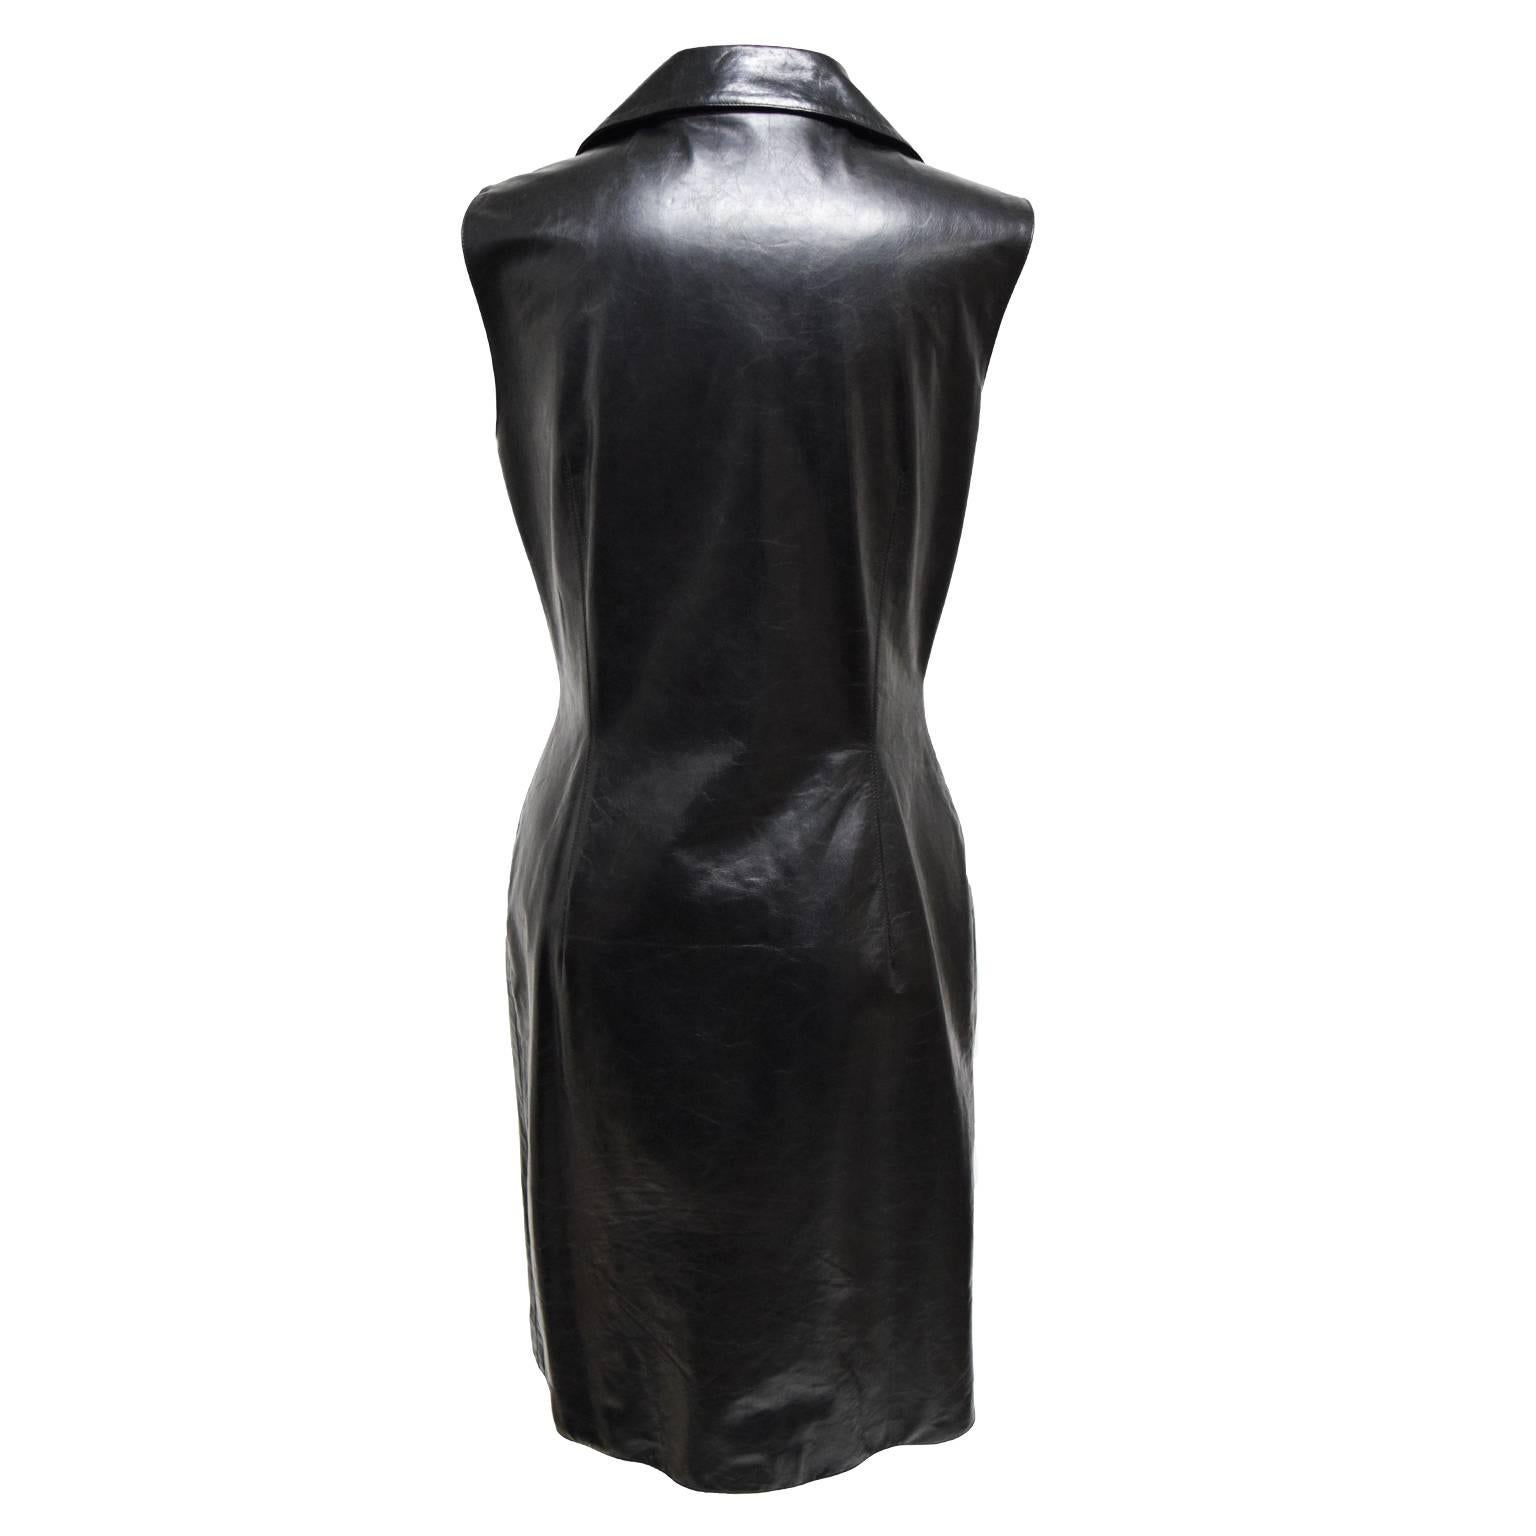 This sexy yet tasteful dress by Oscar de la Renta is made of 100% black leather and is fully lined with silk. The front of the dress is a button down with tortious shell buttons. The dress is sleeveless, has front pockets, and a collared finish.   